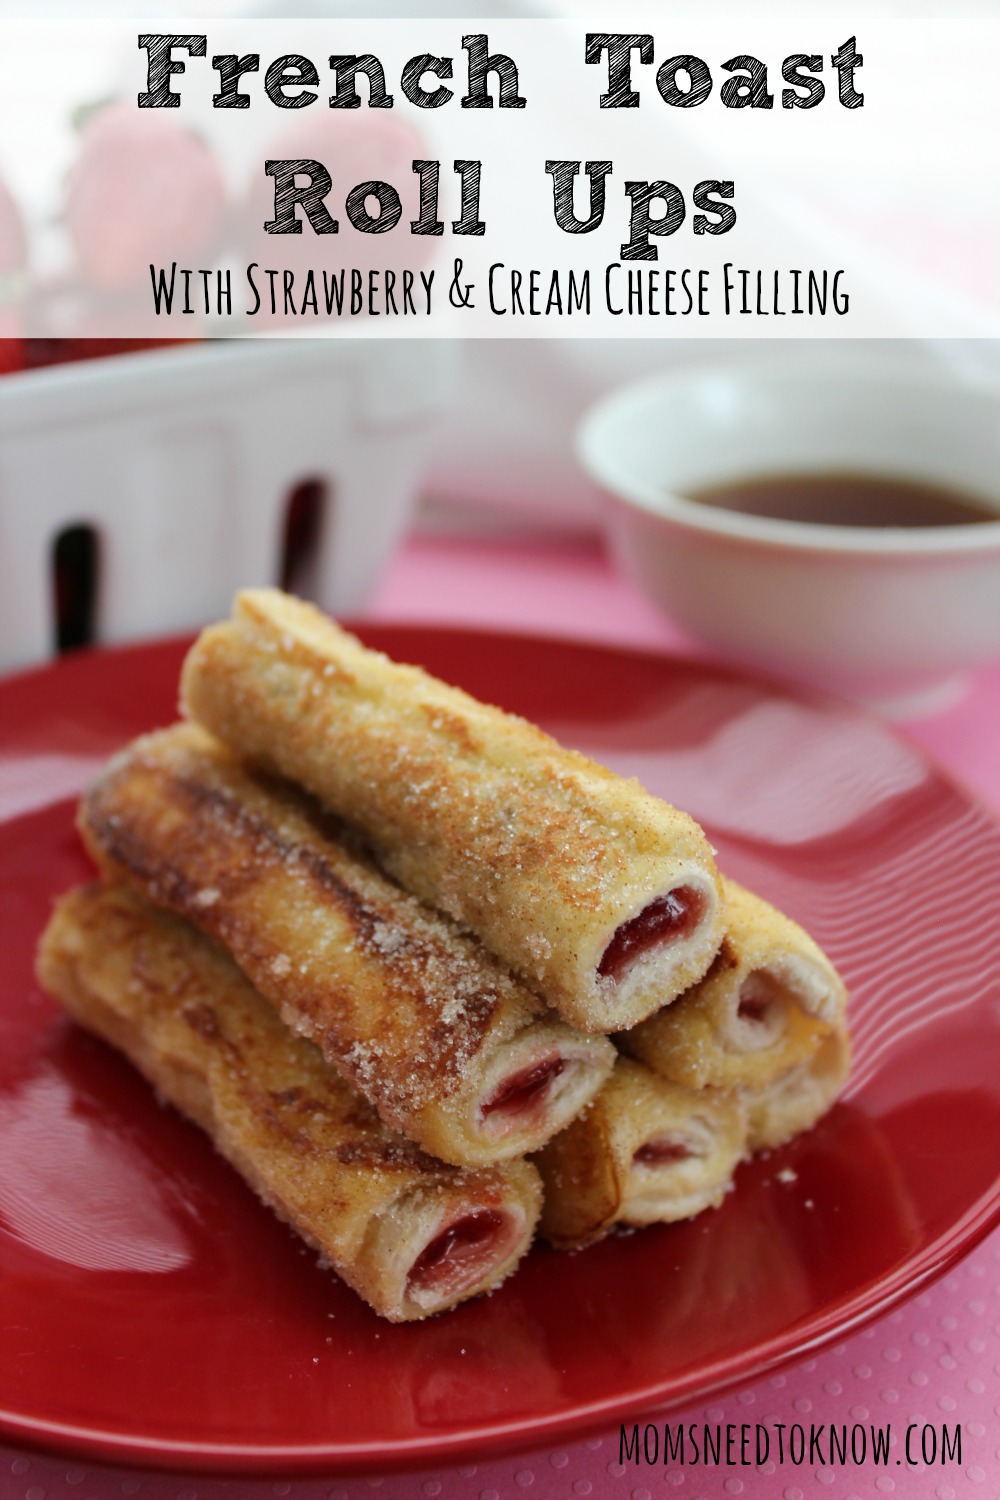 These French Toast Roll Ups are a new twist on a classic recipe. Easy to make (and can be frozen), you can customize the filling as much as you like!